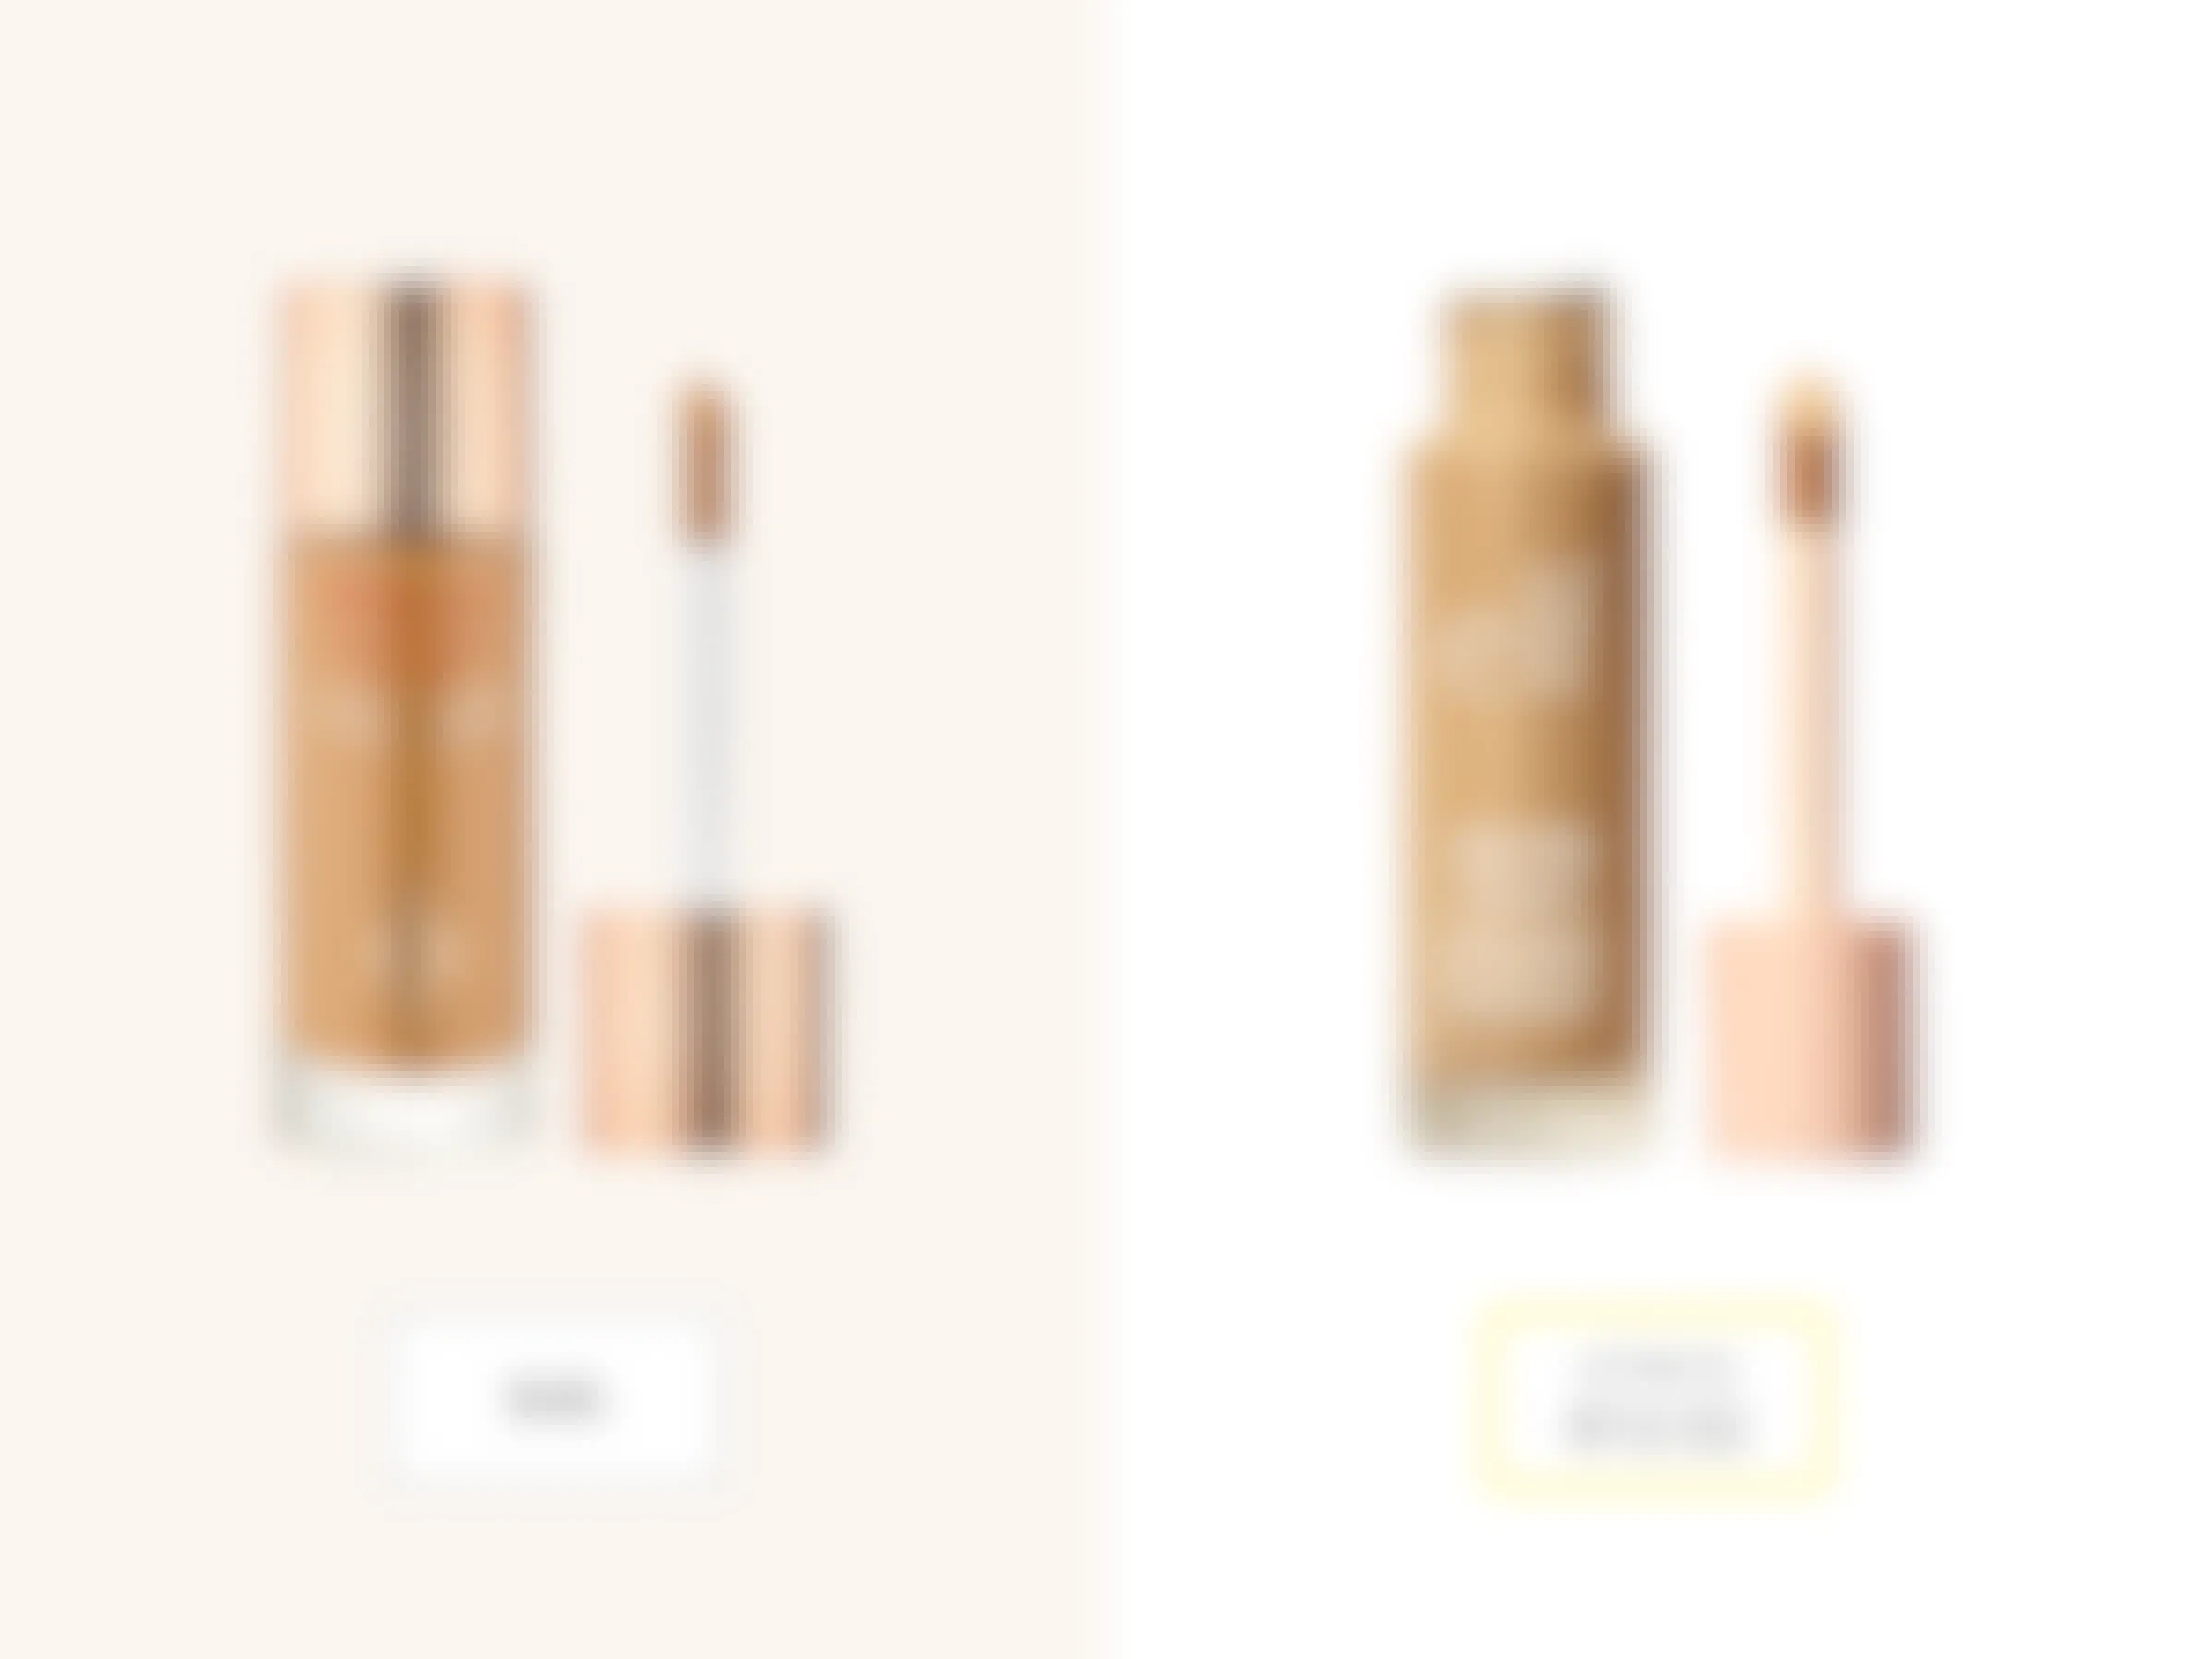 side-by-side comparison of charlotte tilbury's hollywood flawless filter and e.l.f. halo glow filter concealers